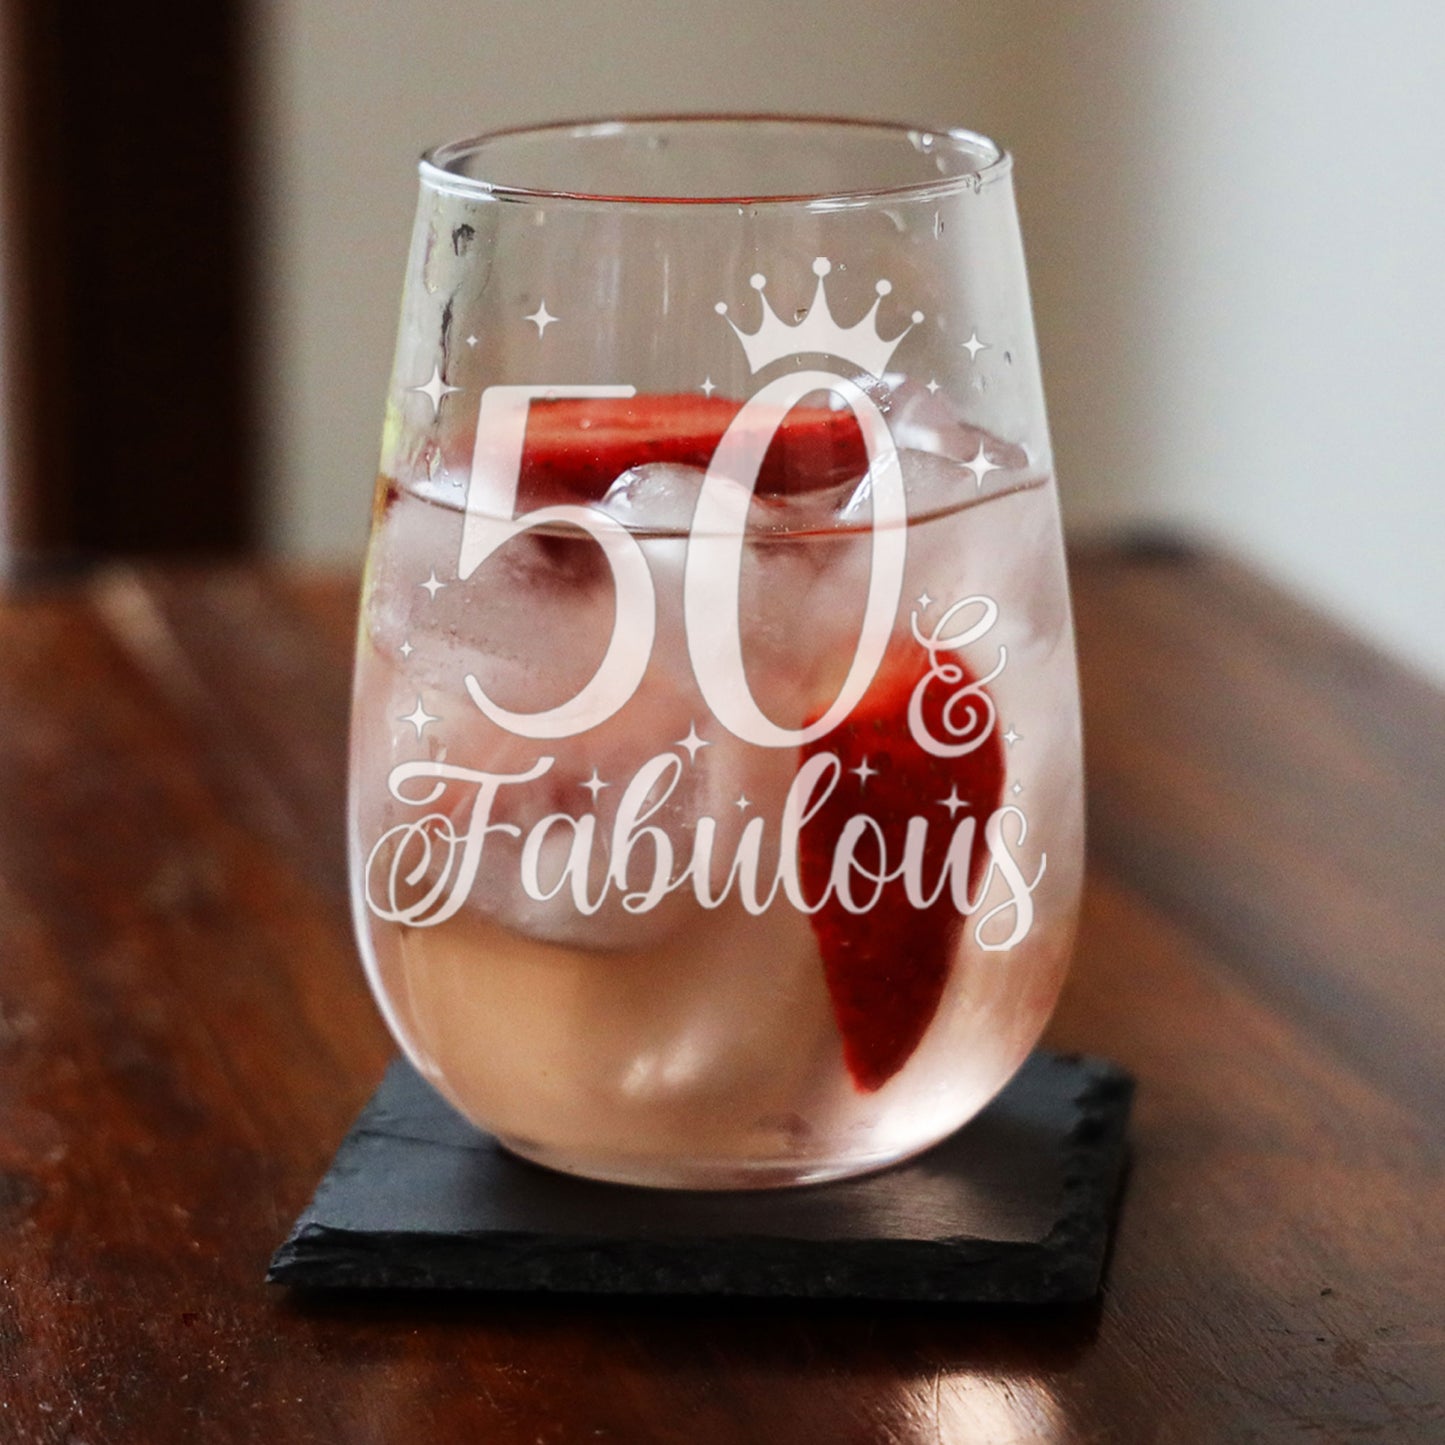 50 & Fabulous Engraved Stemless Gin Glass and/or Coaster Set  - Always Looking Good -   